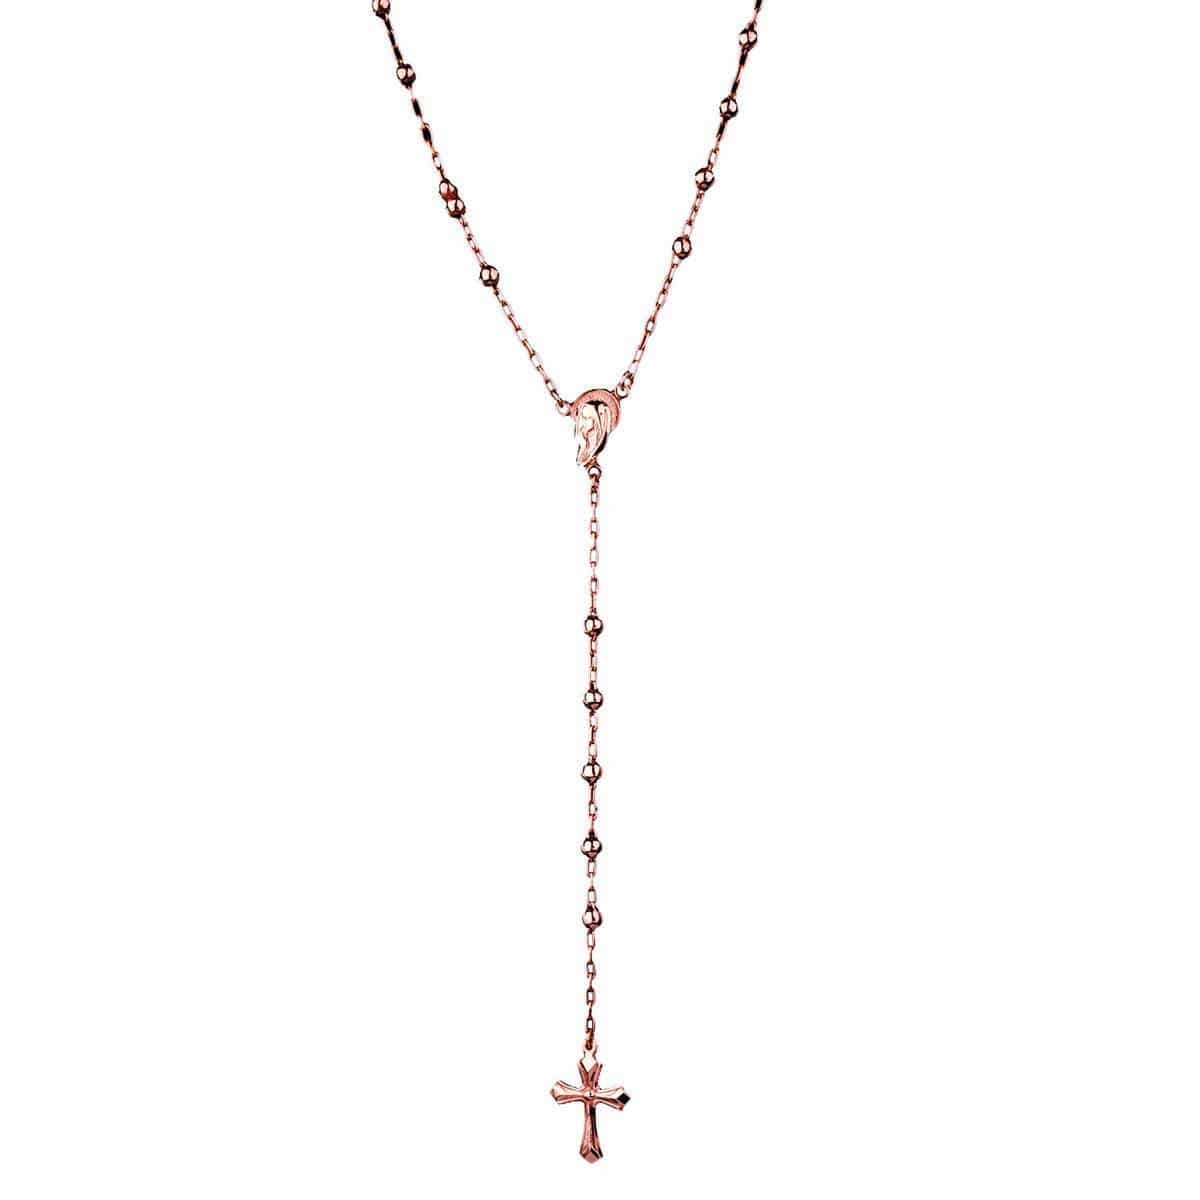 AIRE ROSARY NECKLACE - Chris Aire Fine Jewelry & Timepieces